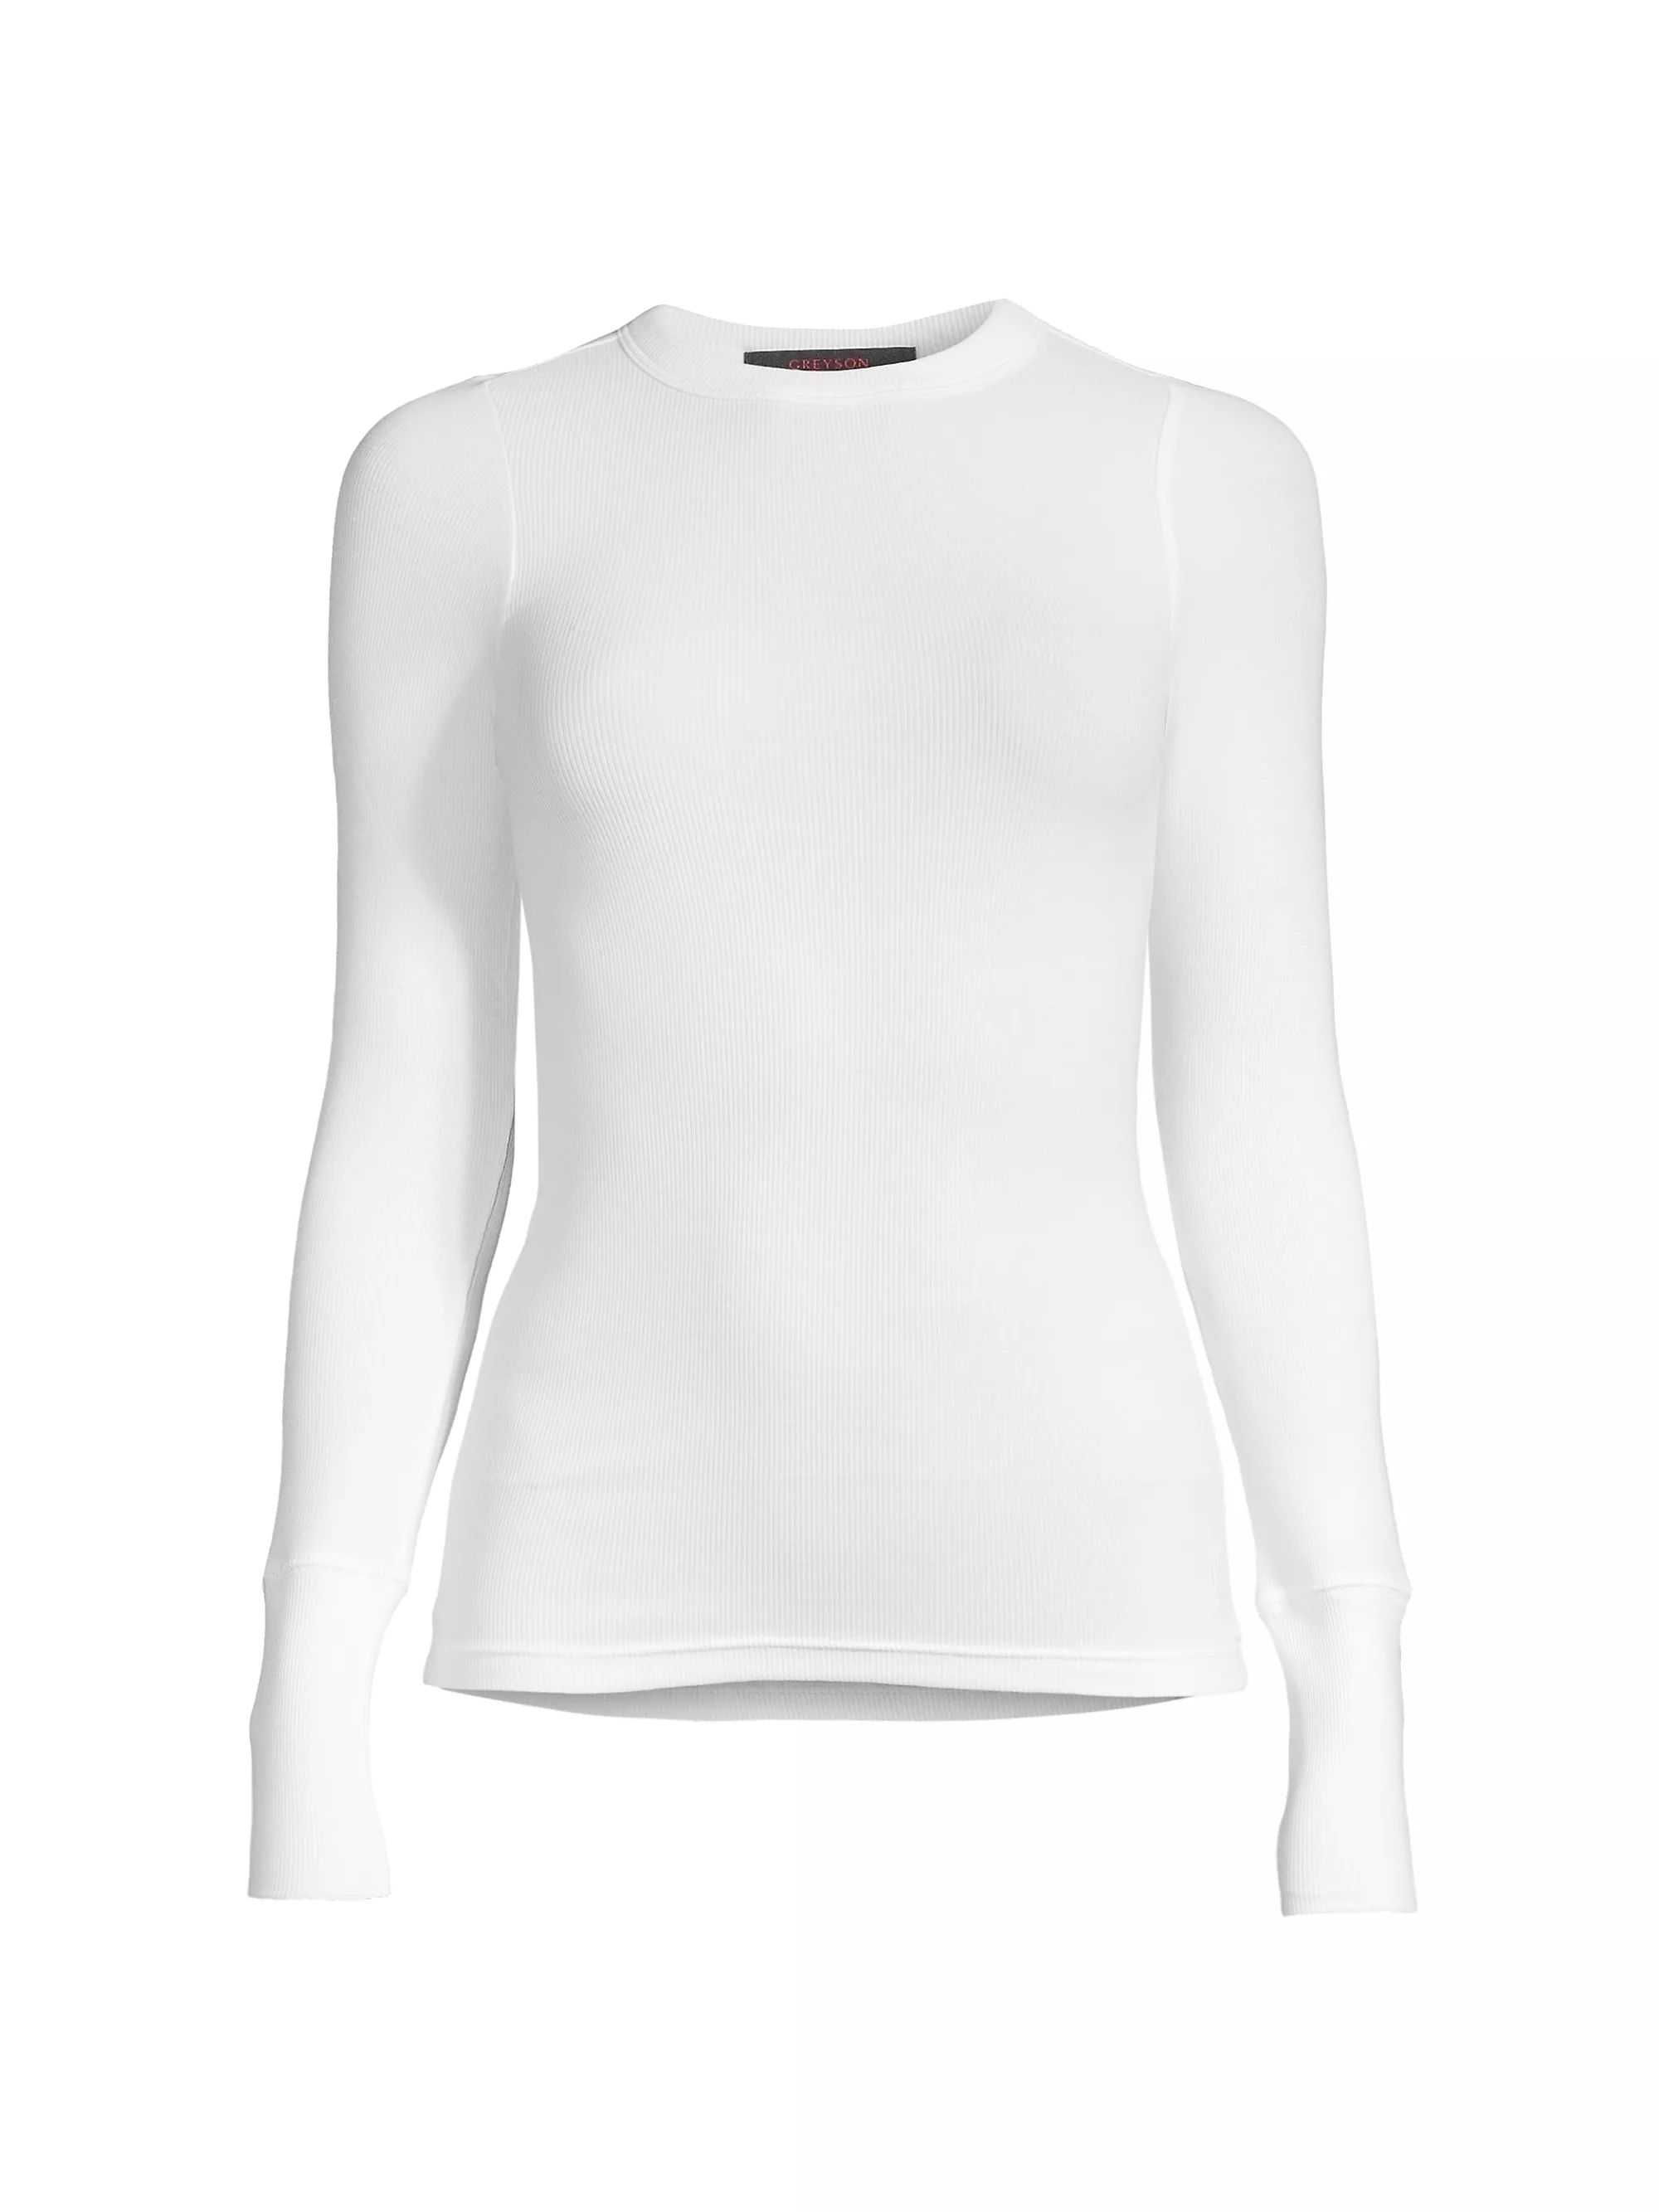 Orion Ribbed Long-Sleeve Top | Saks Fifth Avenue